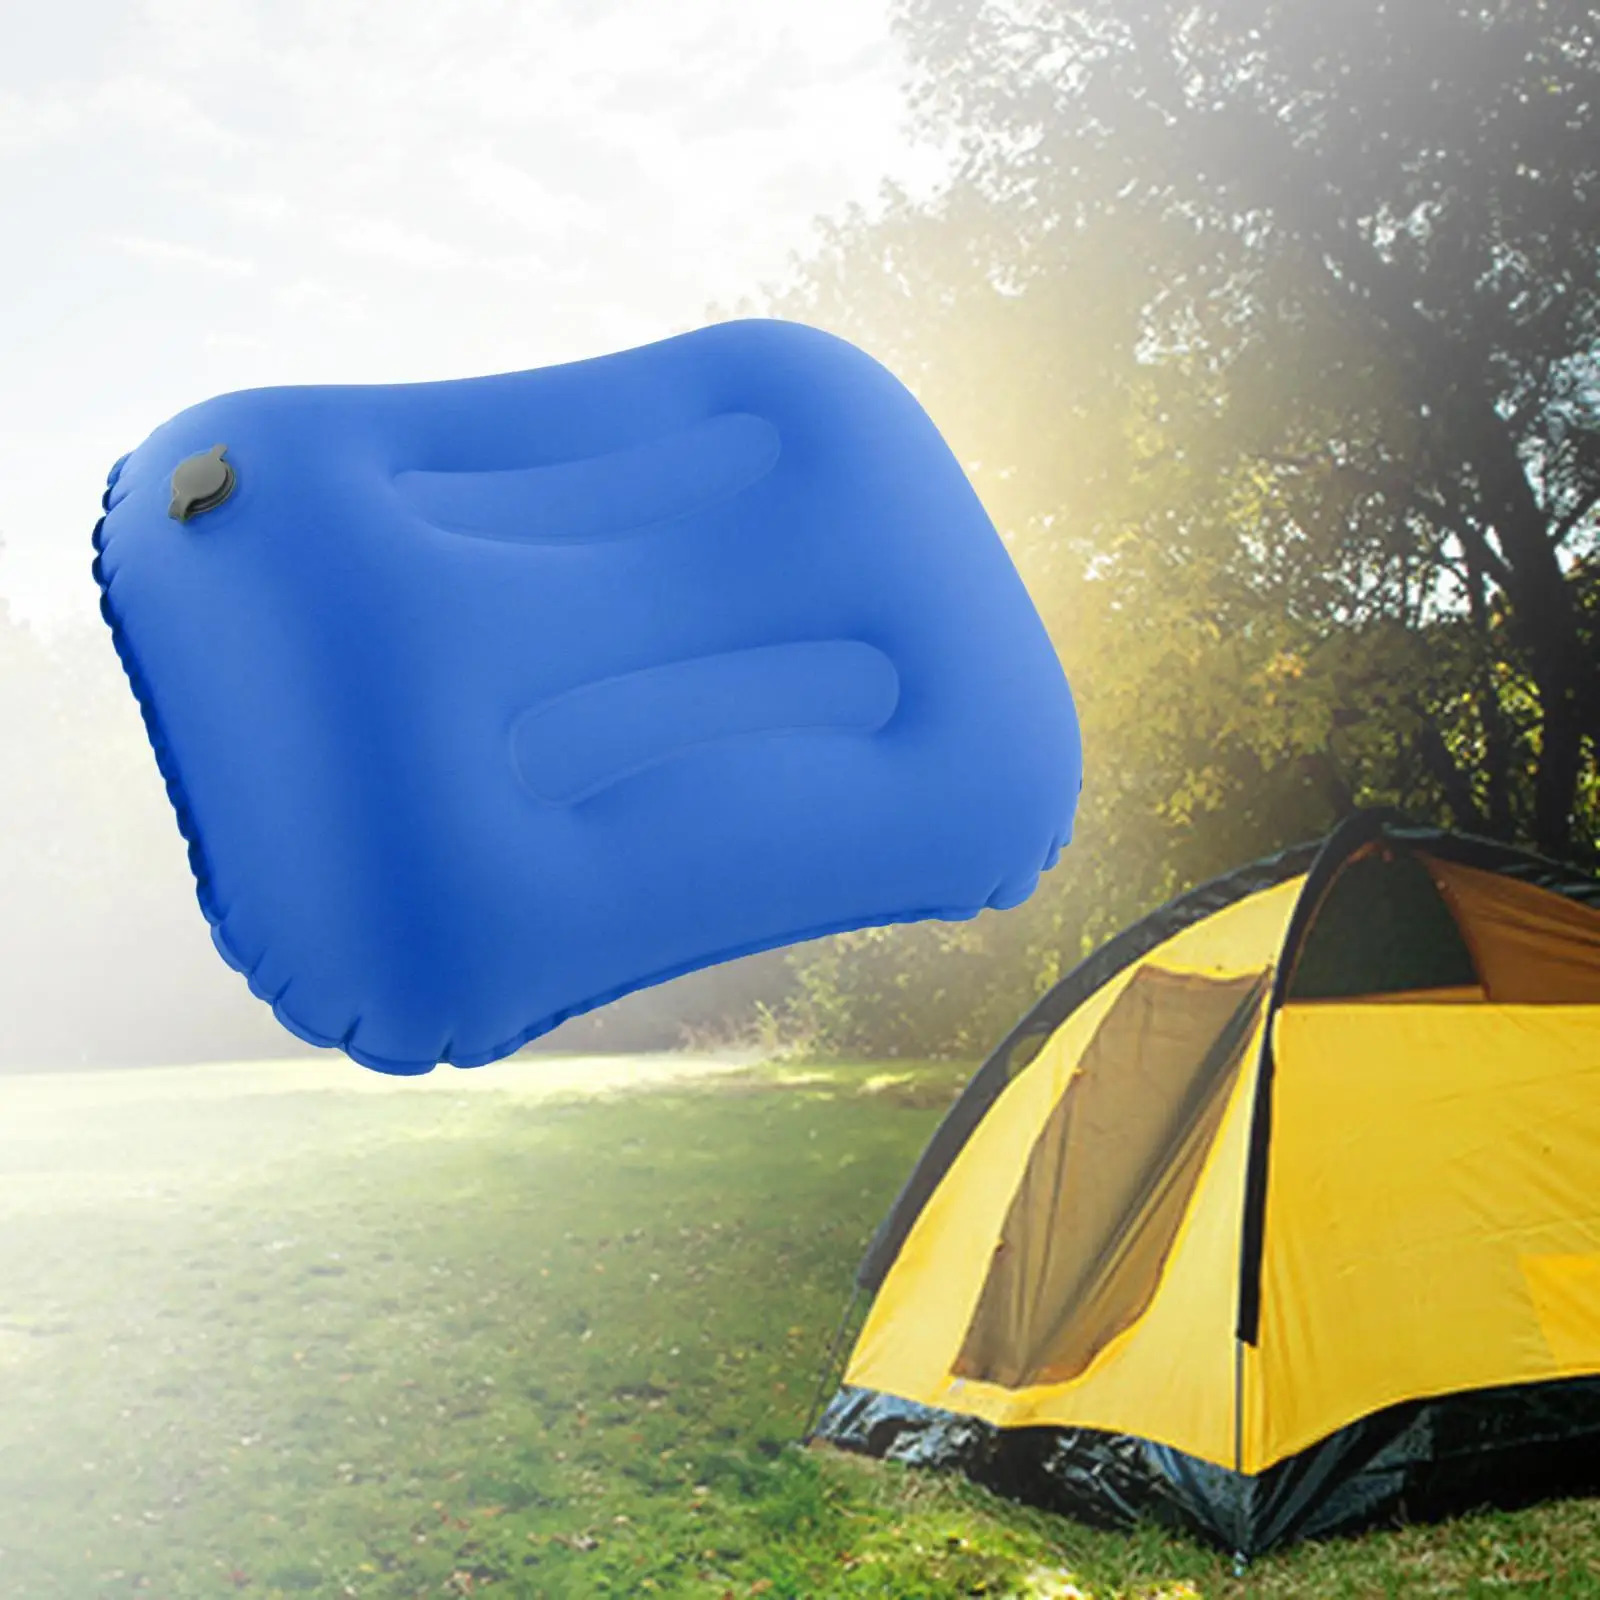 Inflatable Camping Pillow Compact Comfortable Ergonomic Pillows Cushion for Travel Fishing Picnic Hiking Office